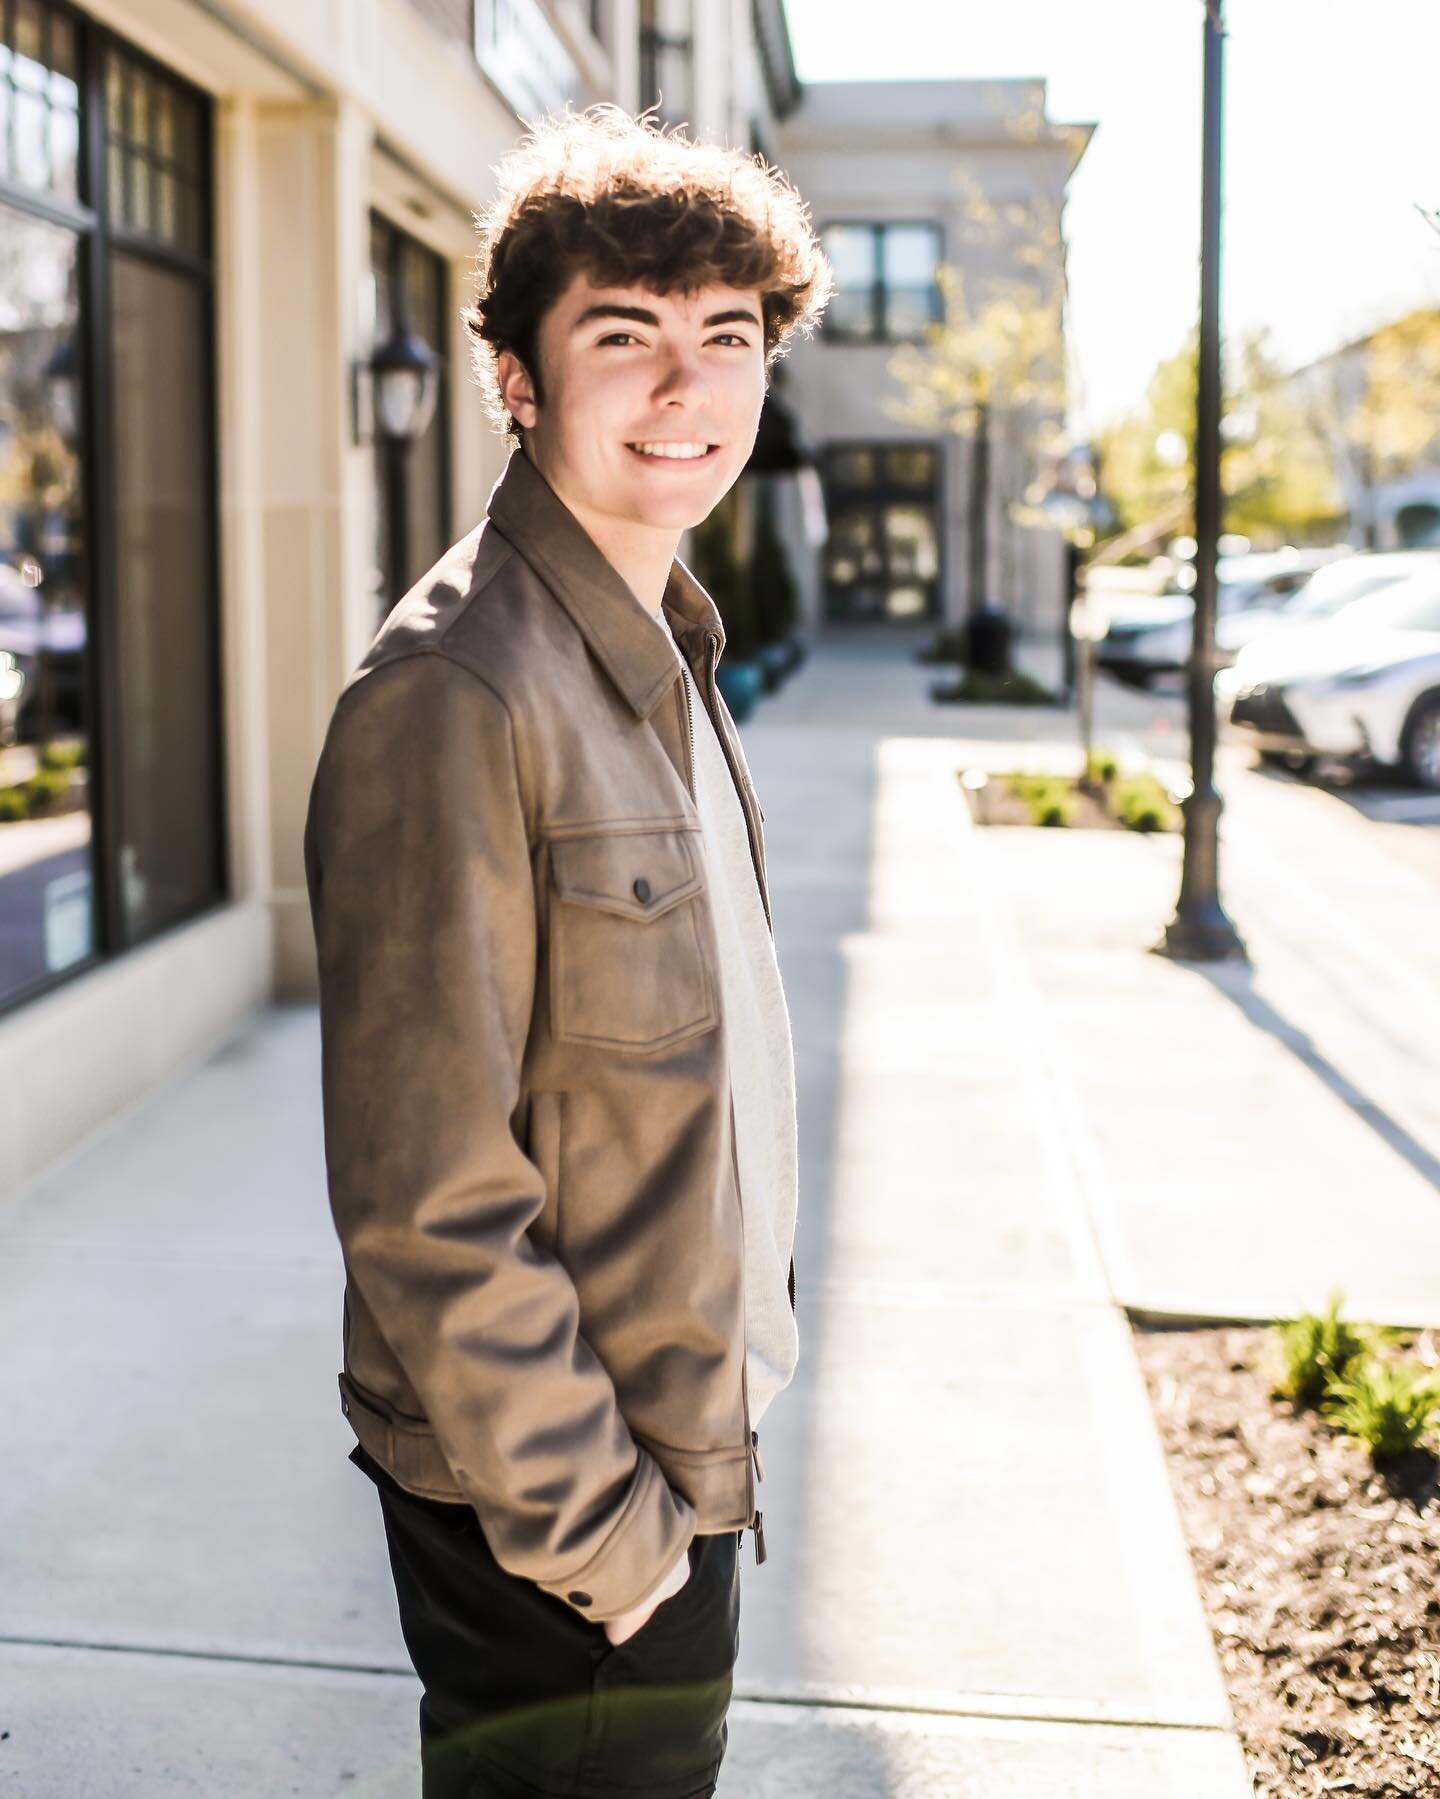 Gah behind in posting so many sessions&hellip;happy Monday everyone!! 

#love #handsome #highschoolsenior #igersindy  #highschoolseniorphotography #lifestylephotographer #candidmoments #dearphotographer #lightinspired #featuremeinstagood #photoofthed